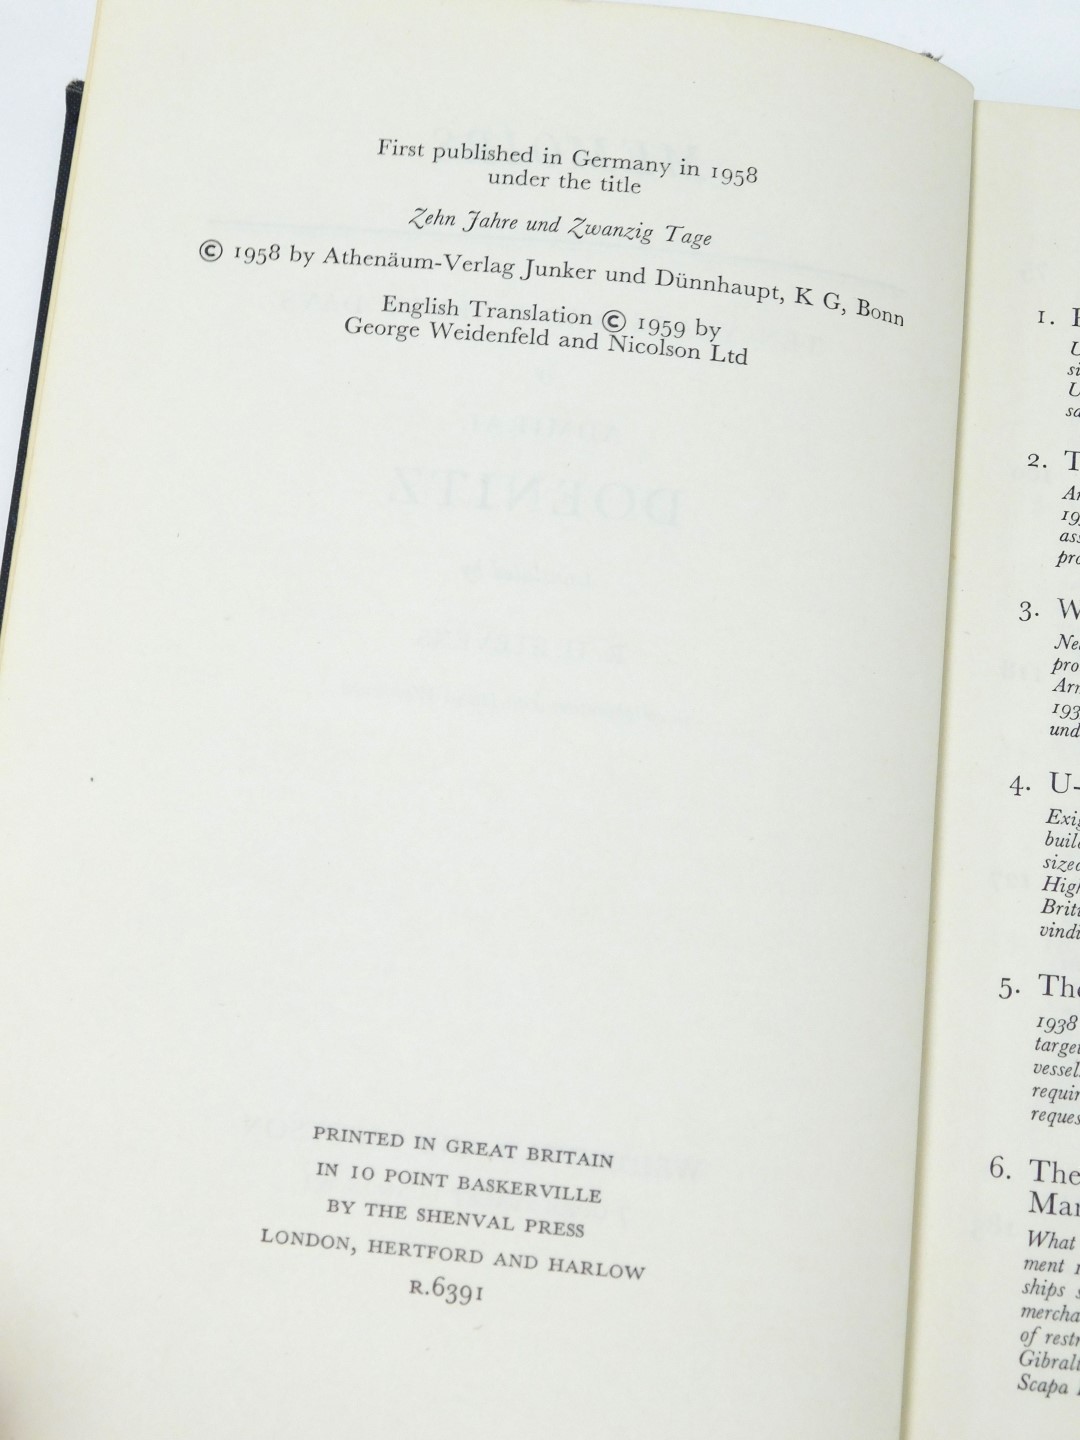 Doenitz (Admiral Karl). Memoirs, Ten Years and Twenty Days, translated by R H Stevens, autographed c - Image 4 of 4